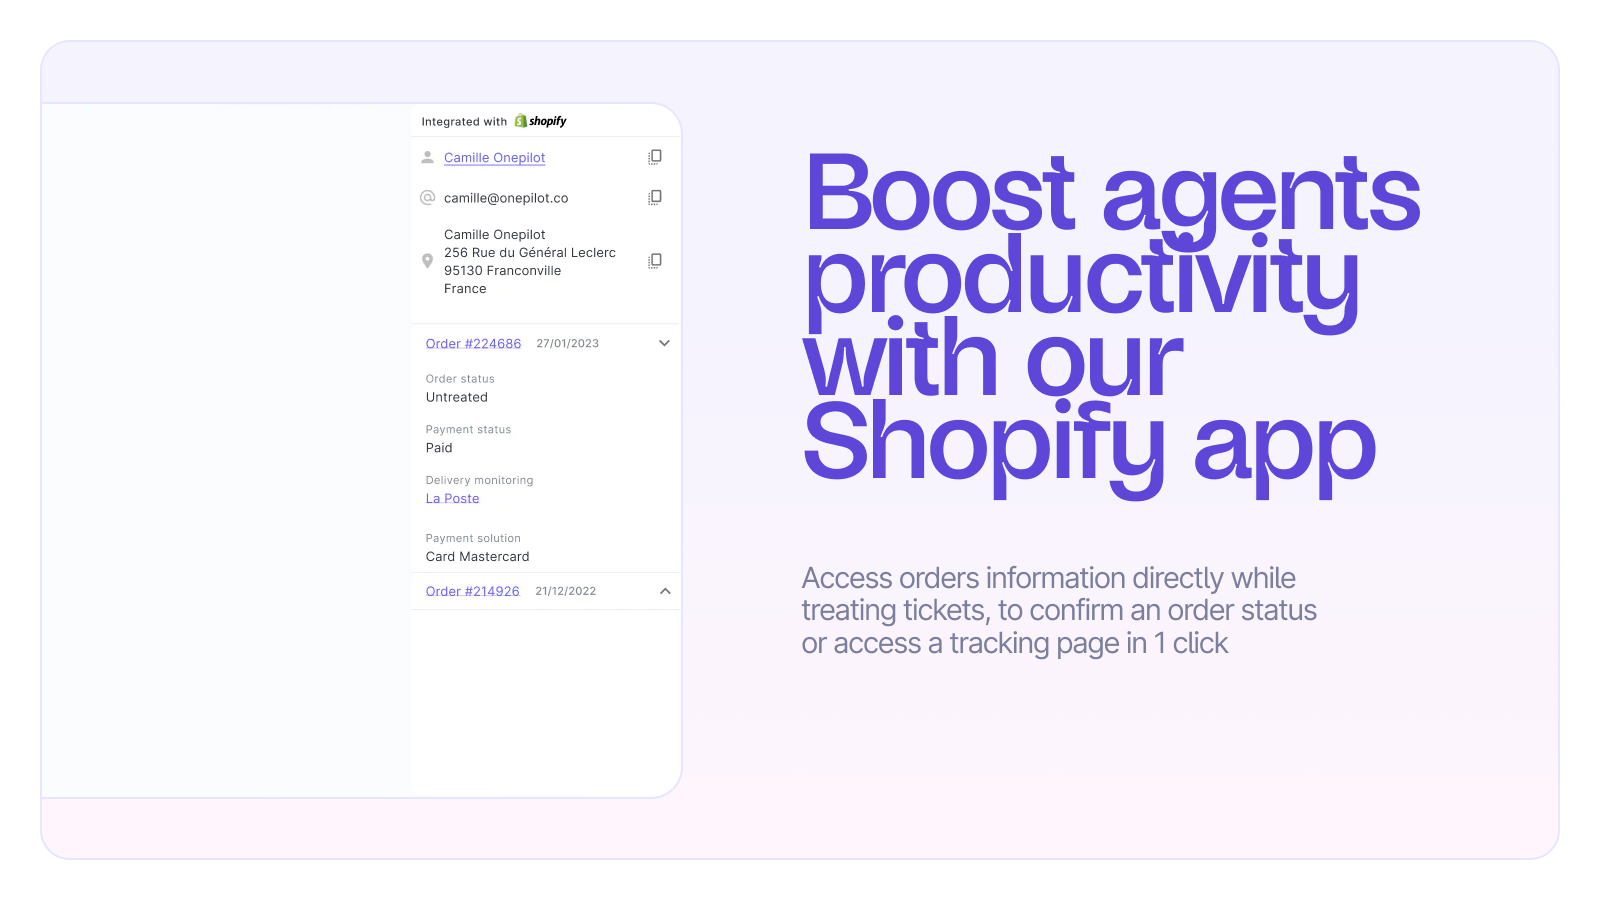 Boost agents productivity